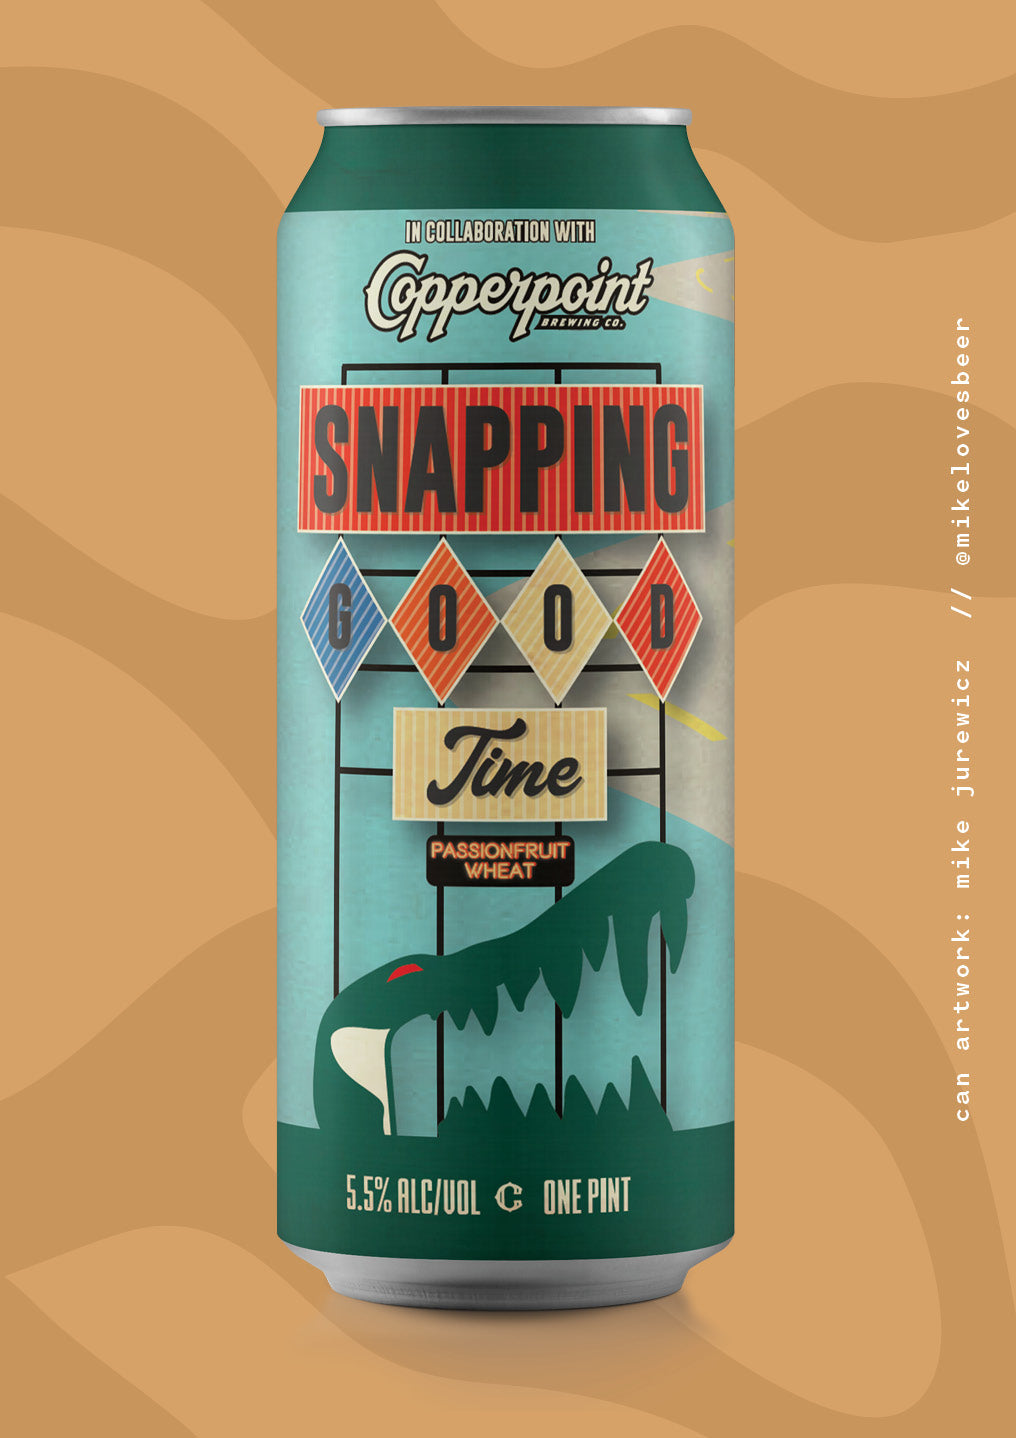 Snapping Good Time by Copperpoint